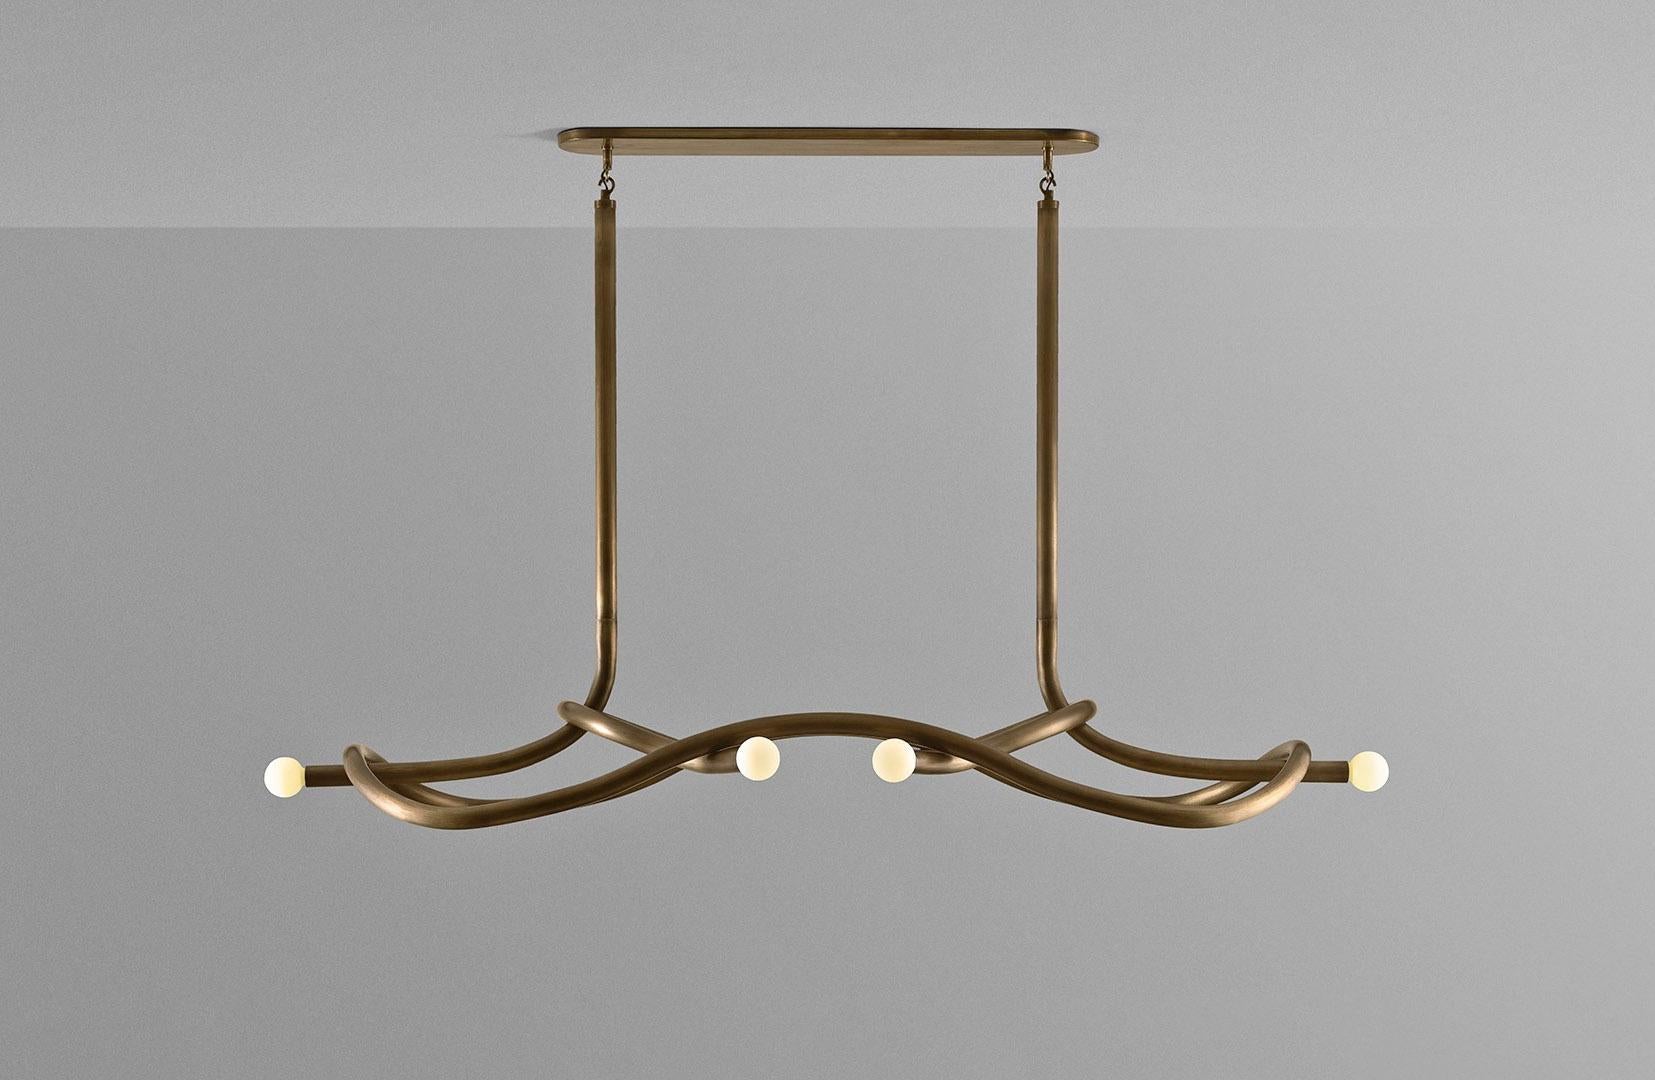 Contemporary Polished Brass Chandelier, Tryst Six by Paul Matter

Tryst chandelier explores the relationship between interlocked forms in perfect union and balance. A study of form and function that evokes the grace and strength of the contributor